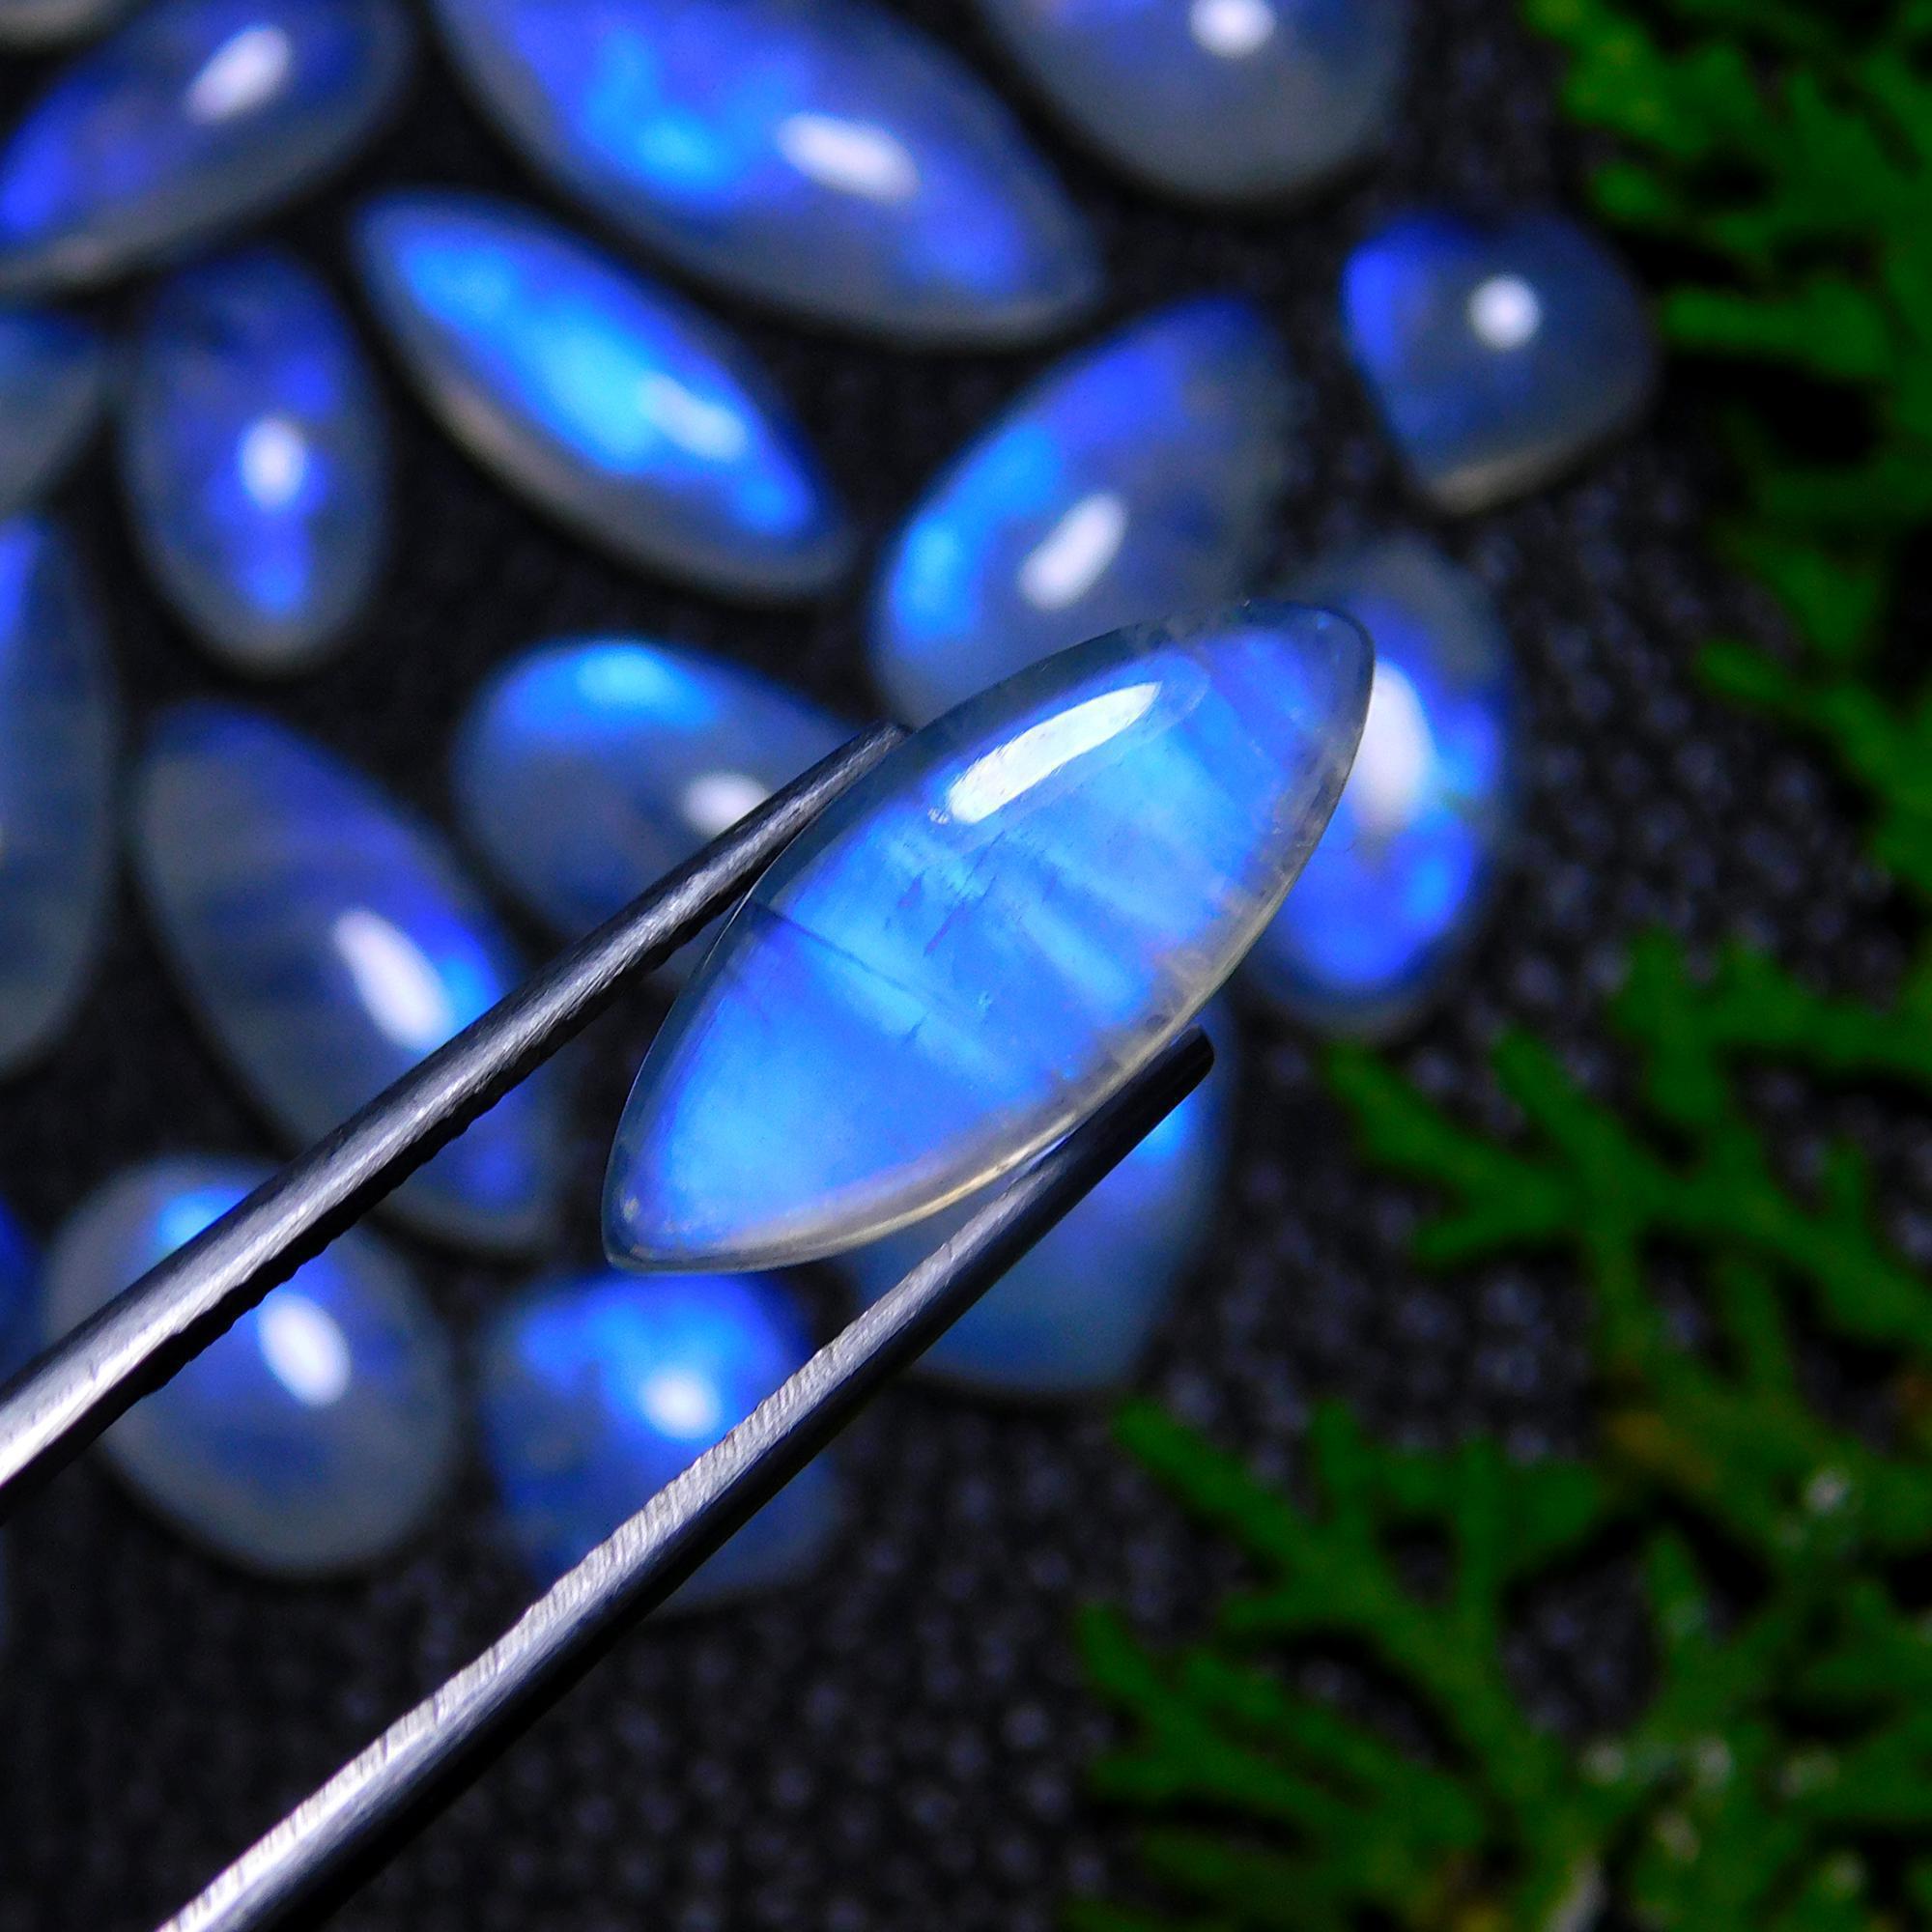 27Pcs 126Cts Natural Rainbow Moonstone Cabochon Blue Fire Loose Gemstone Crystal jewelry supplies wholesale lot gift for her Black Friday 20X5 9X9mm#9401